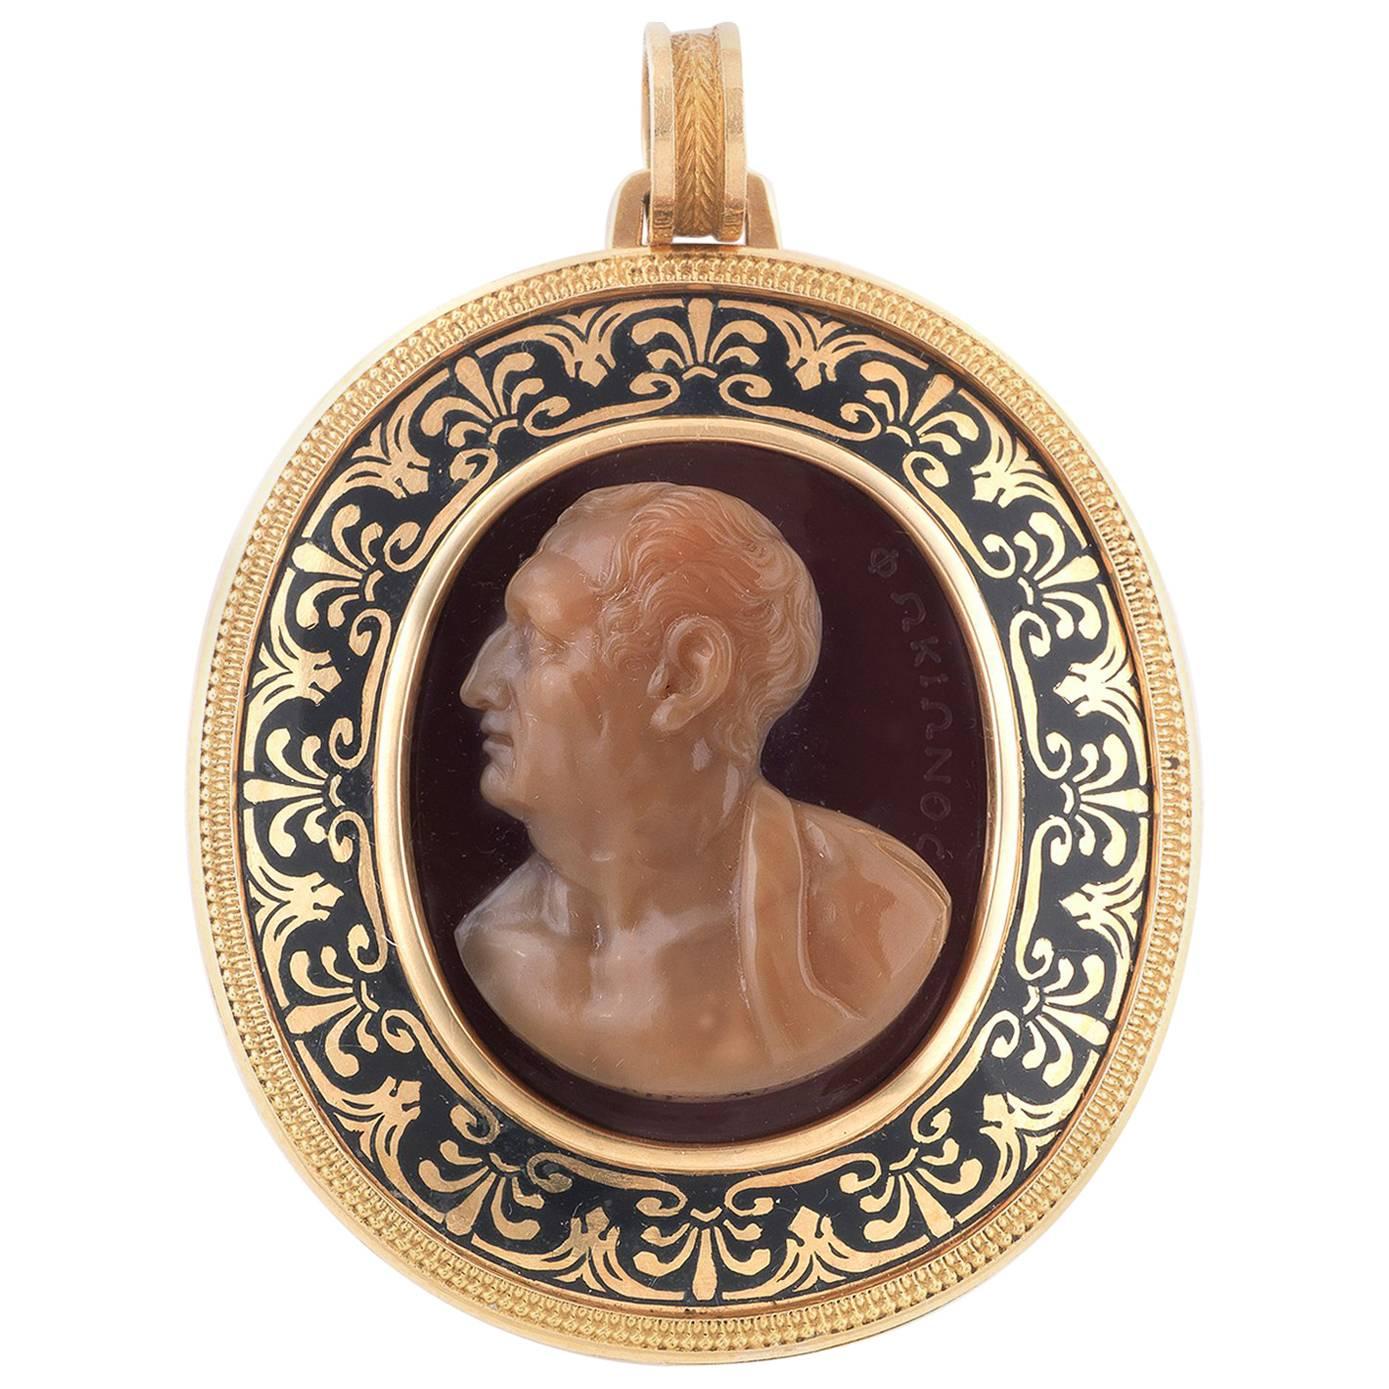 Agate Cameo of by Girometti, First Half of the 19th Century